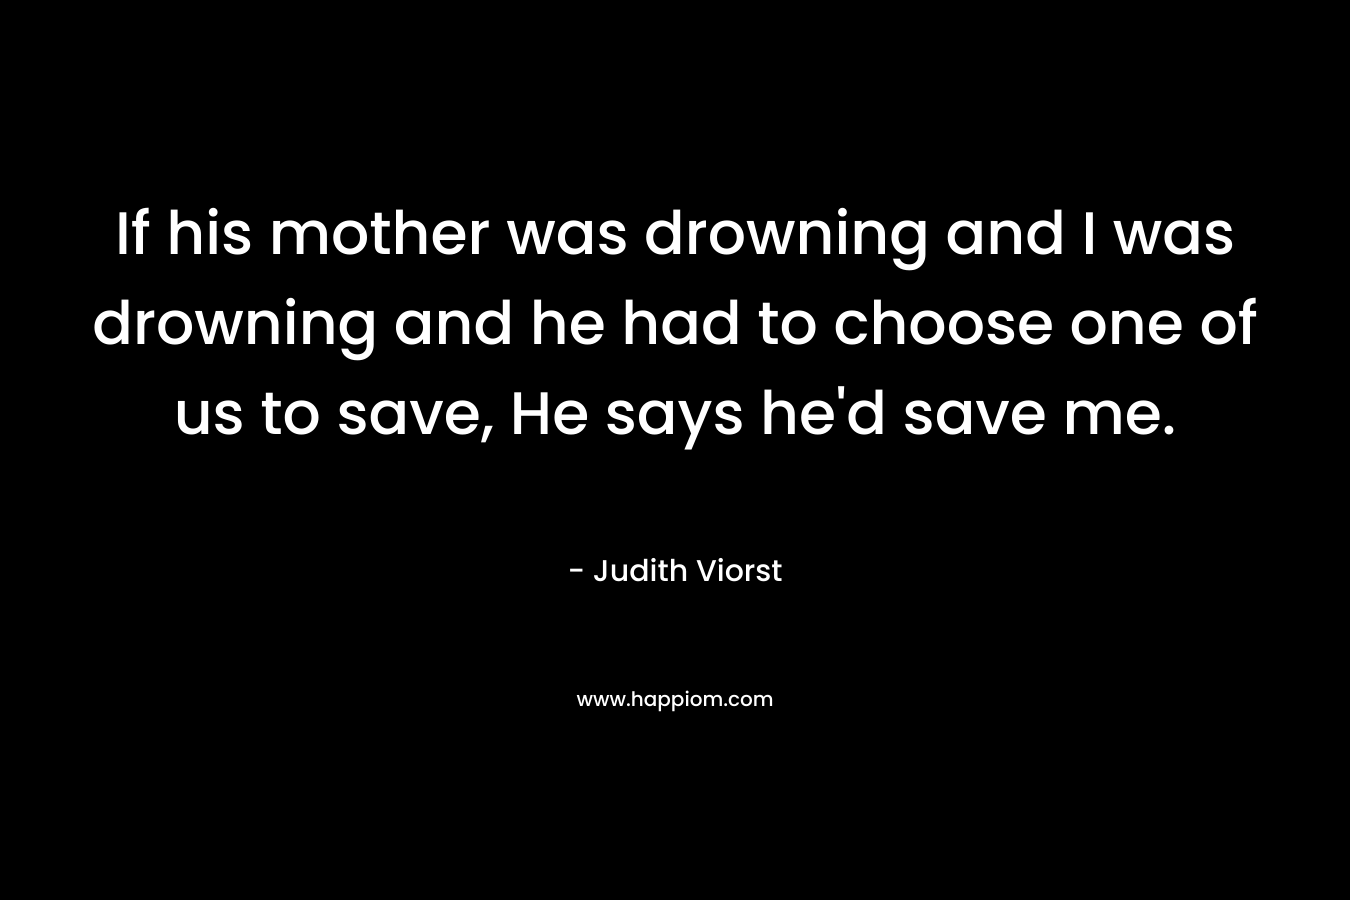 If his mother was drowning and I was drowning and he had to choose one of us to save, He says he’d save me. – Judith Viorst